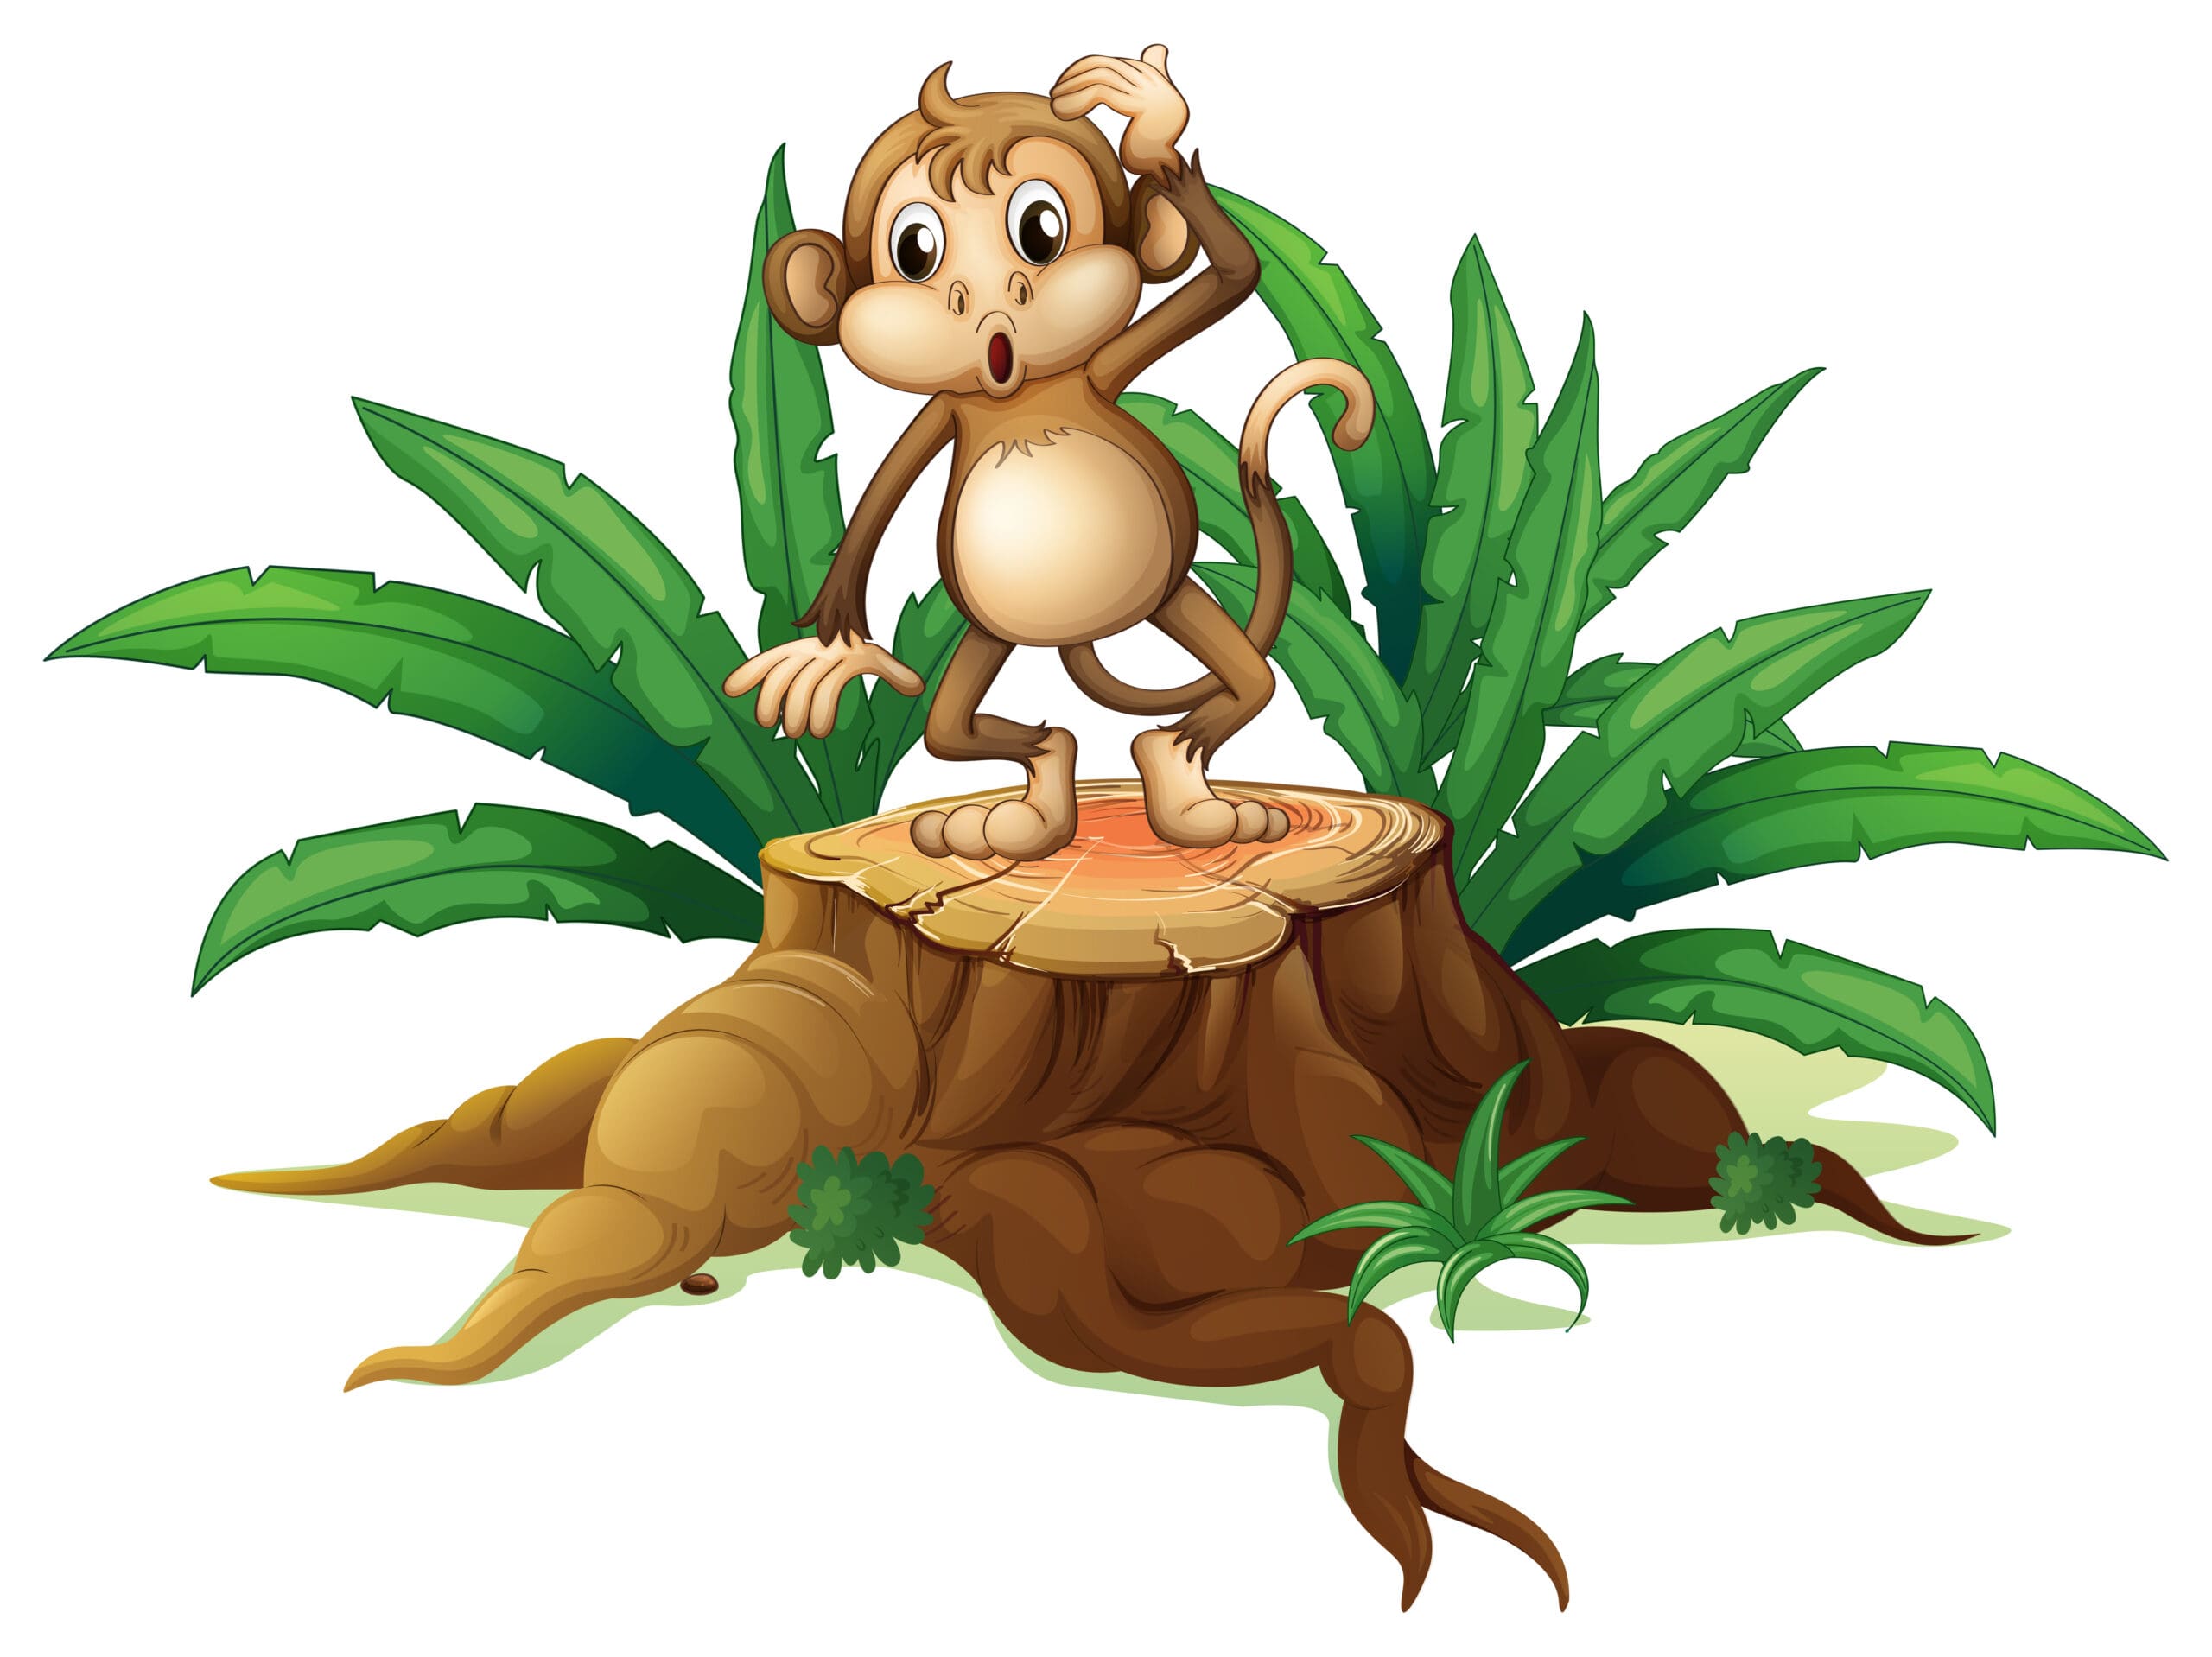 A monkey standing on the stump with leaves